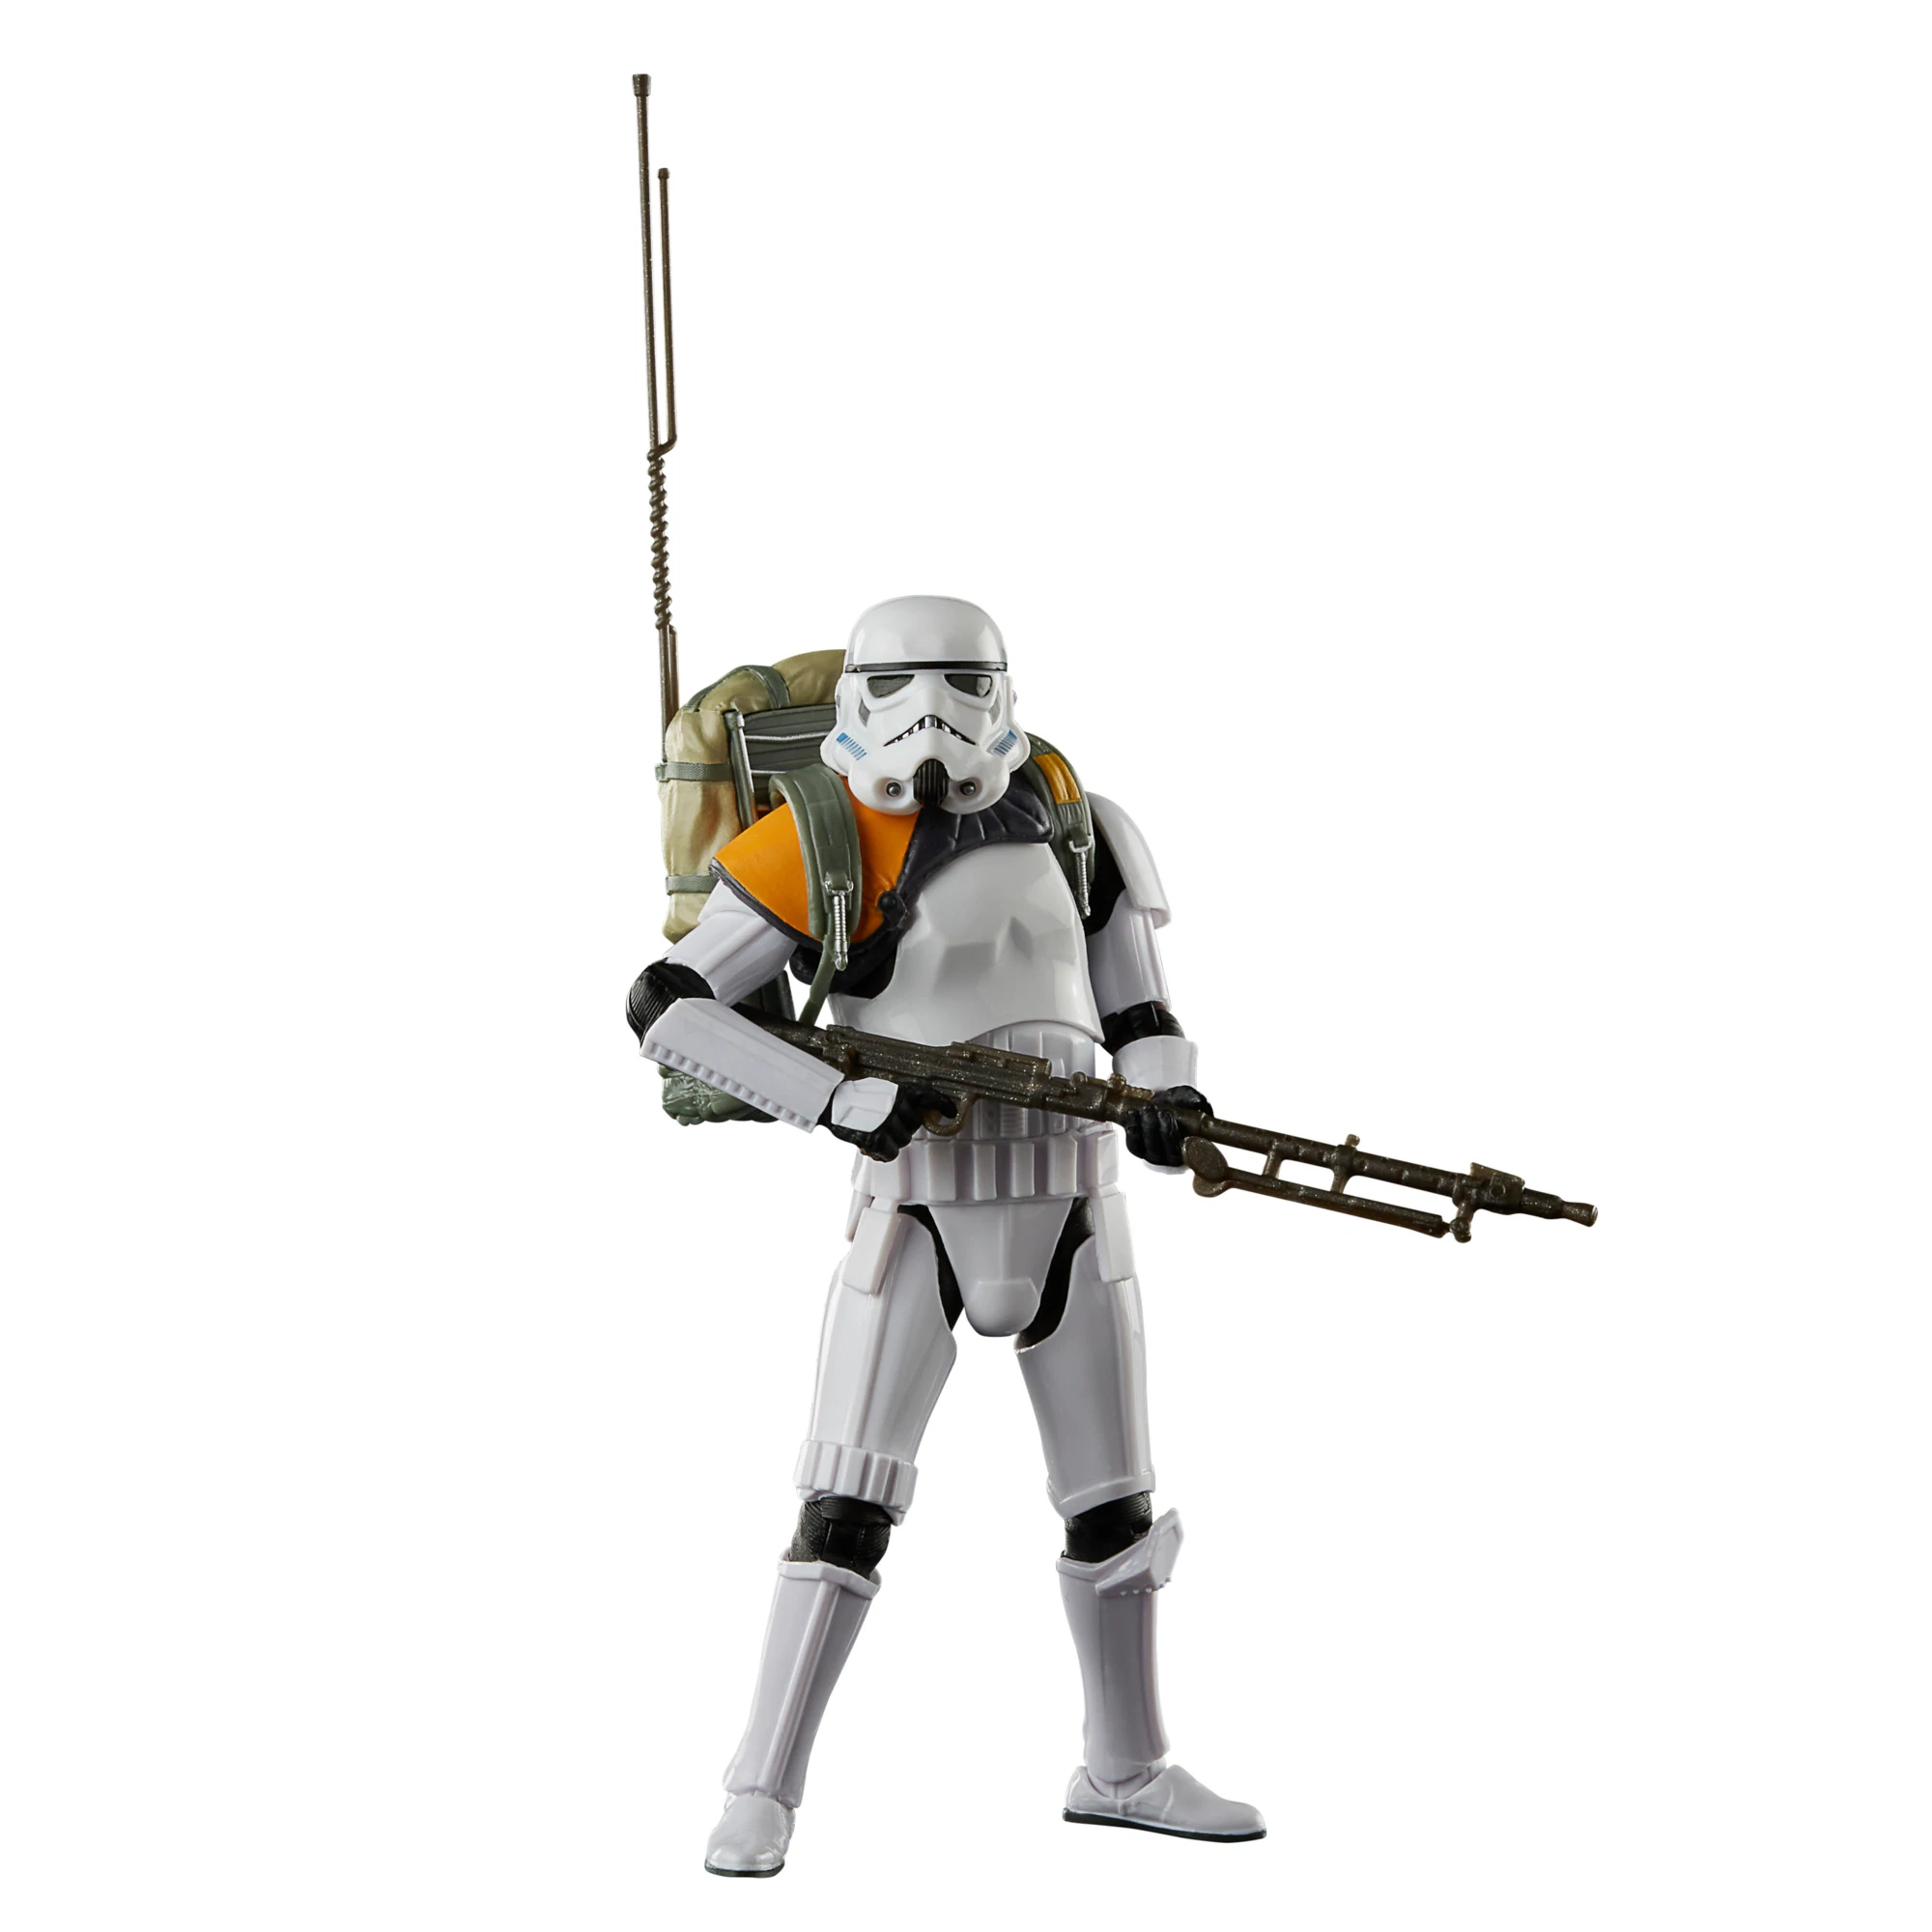 Star Wars - The Black Series - Rogue One - Jedha Patrol Stormtrooper Action Figure